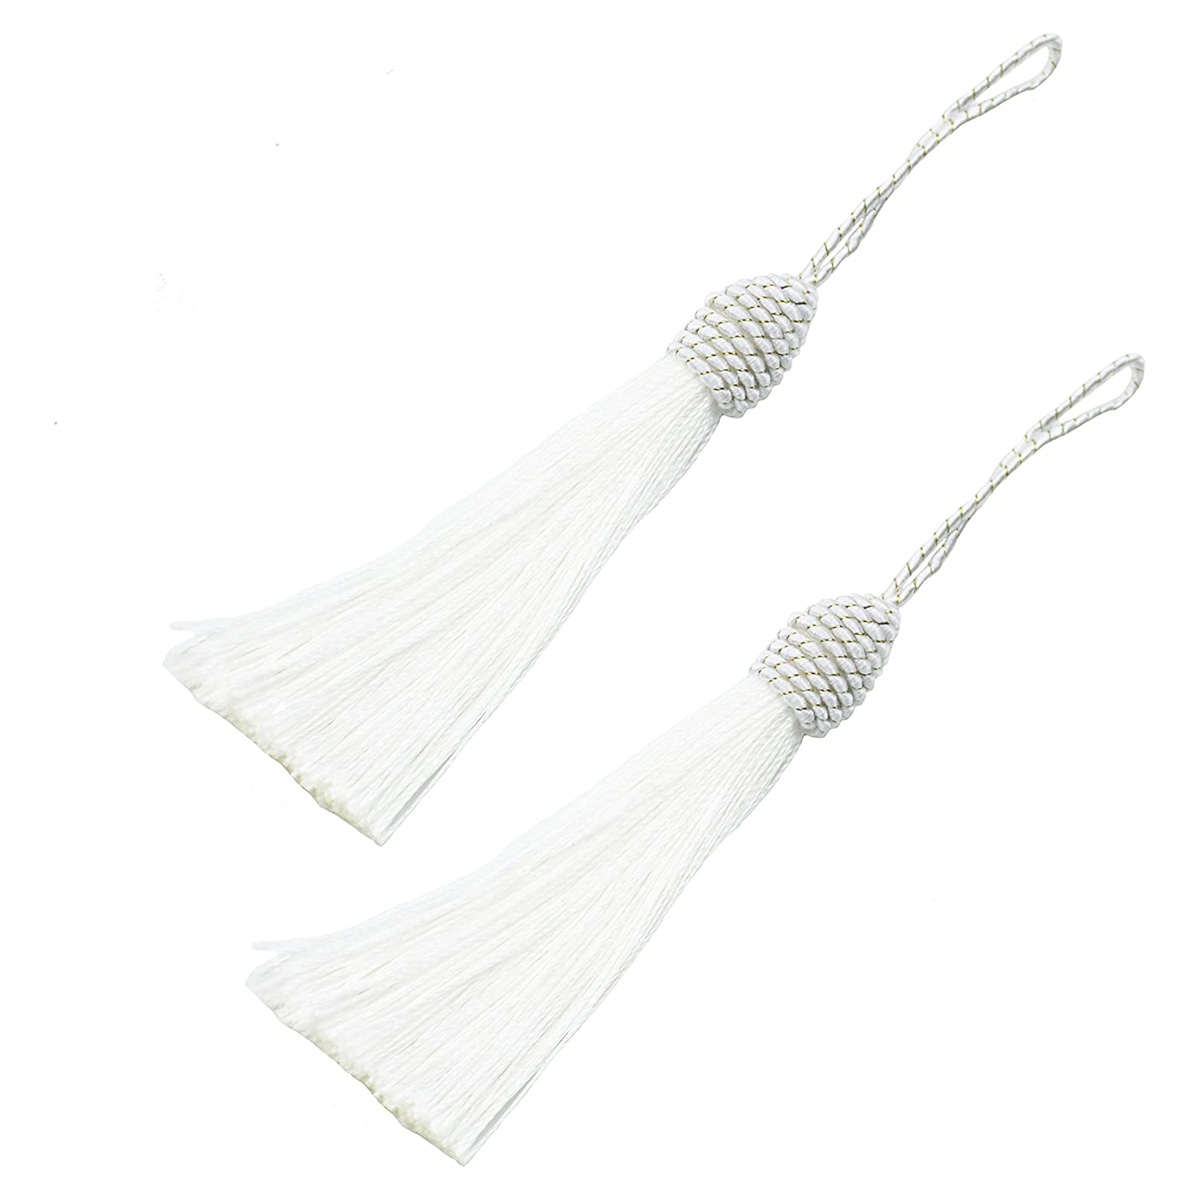 6 Inch Silky Floss Bookmark Tassels with 2-Inch Cord Loop and Small Chinese Knot for Jewelry white